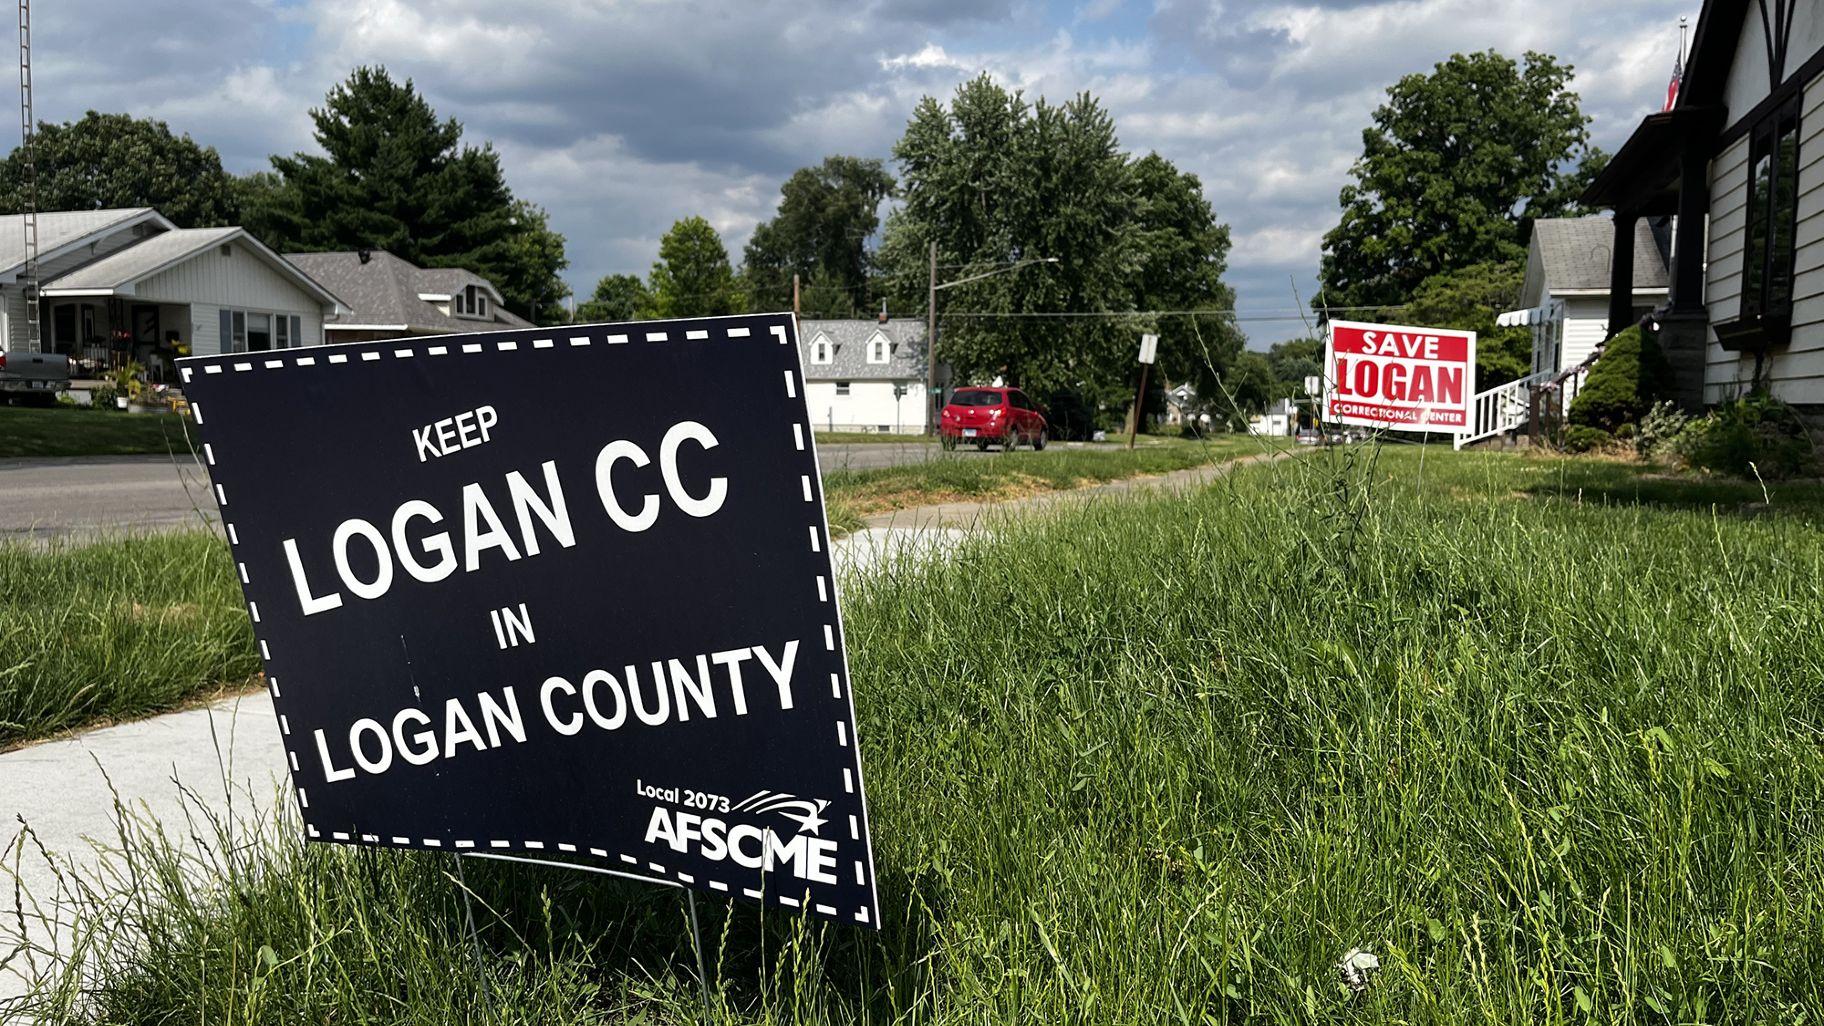 Signs expressing support for Logan Correctional Center’s continued operation dot lawns in Lincoln, where Logan is located. (Hannah Meisel / Capitol News Illinois)